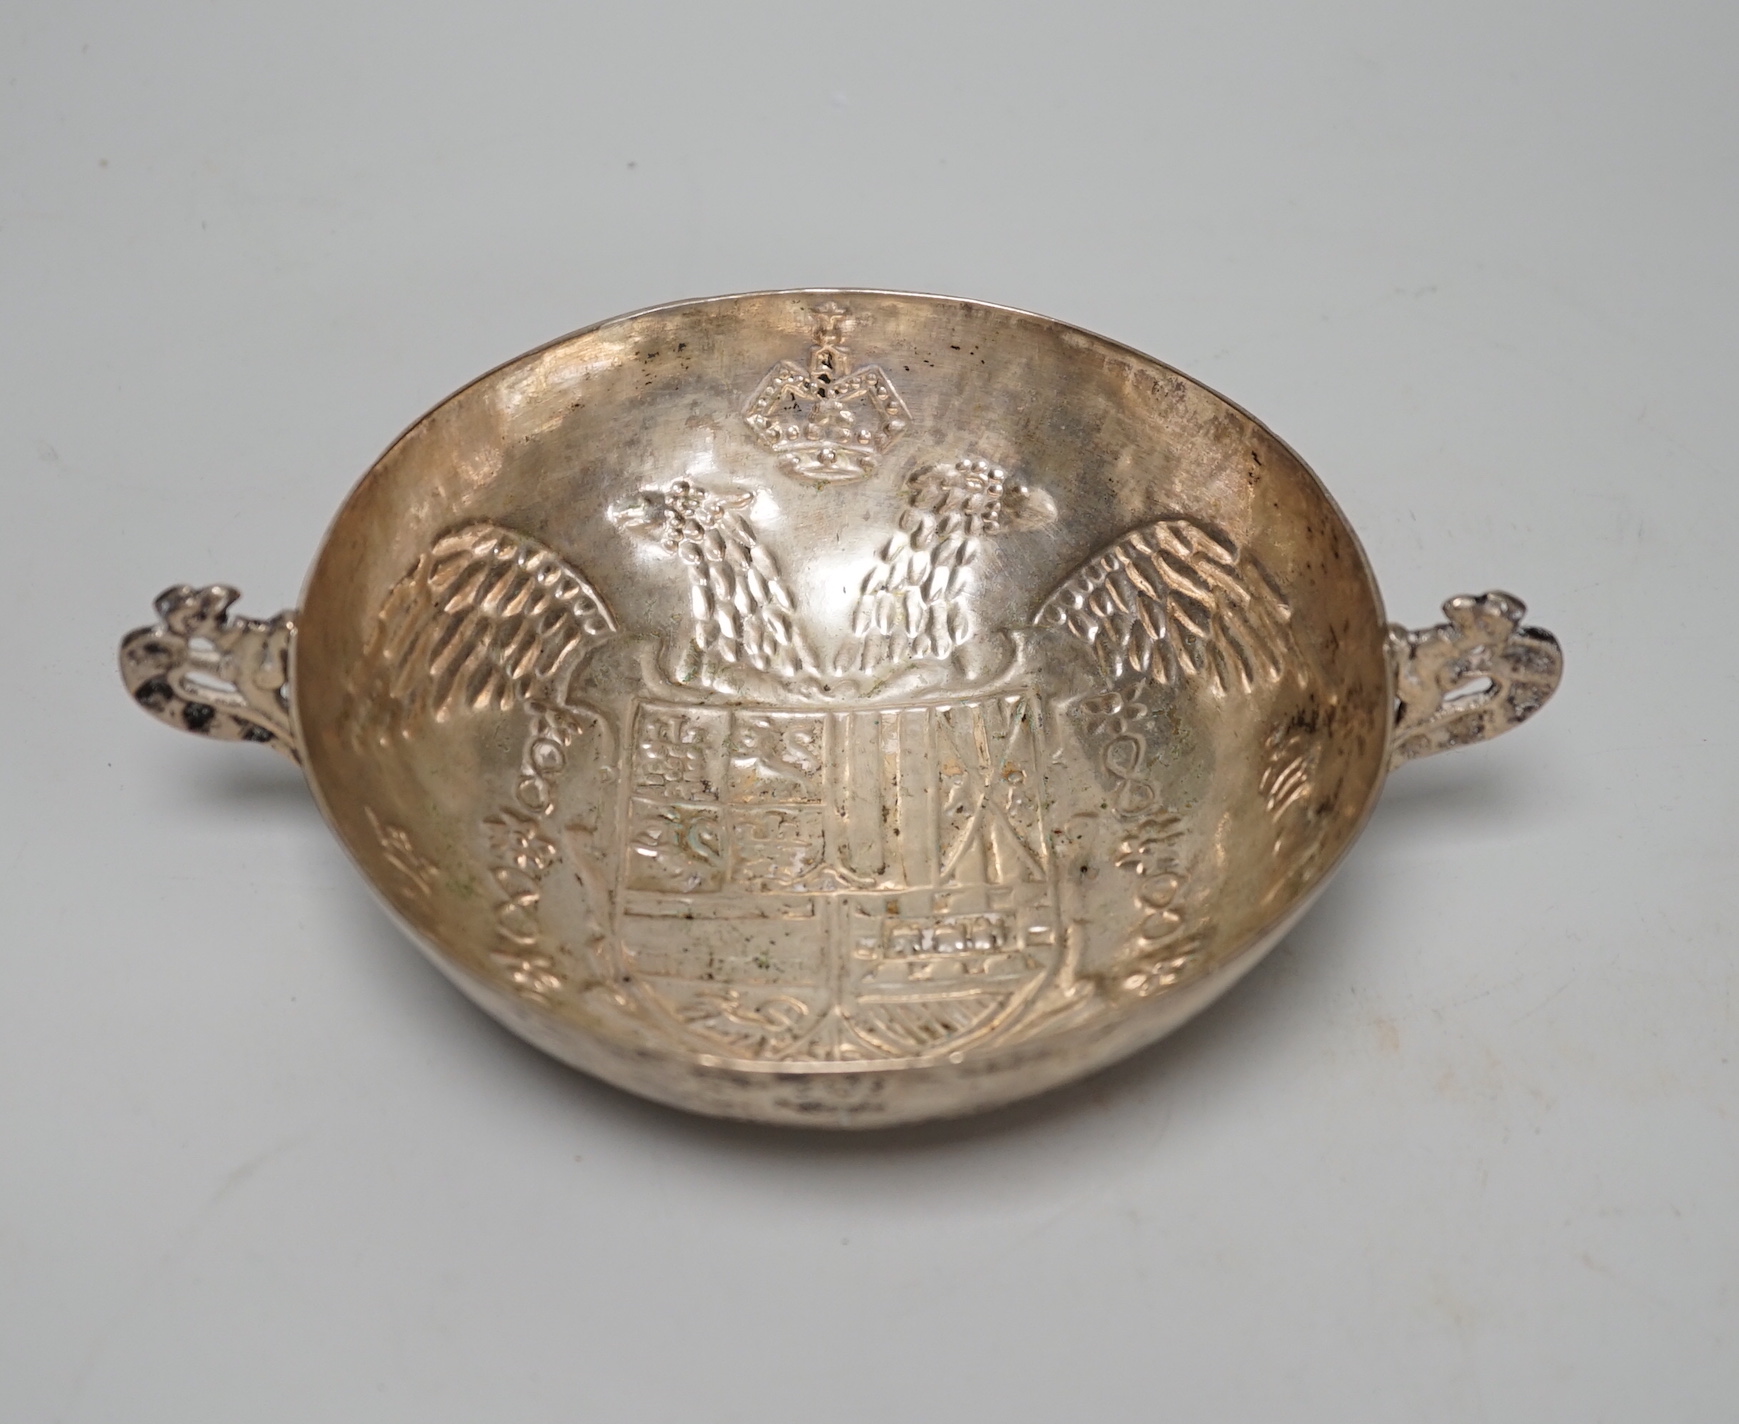 An antique continental white metal twin handled dish, embossed with a crest and double headed eagle, 19.3cm wide overall